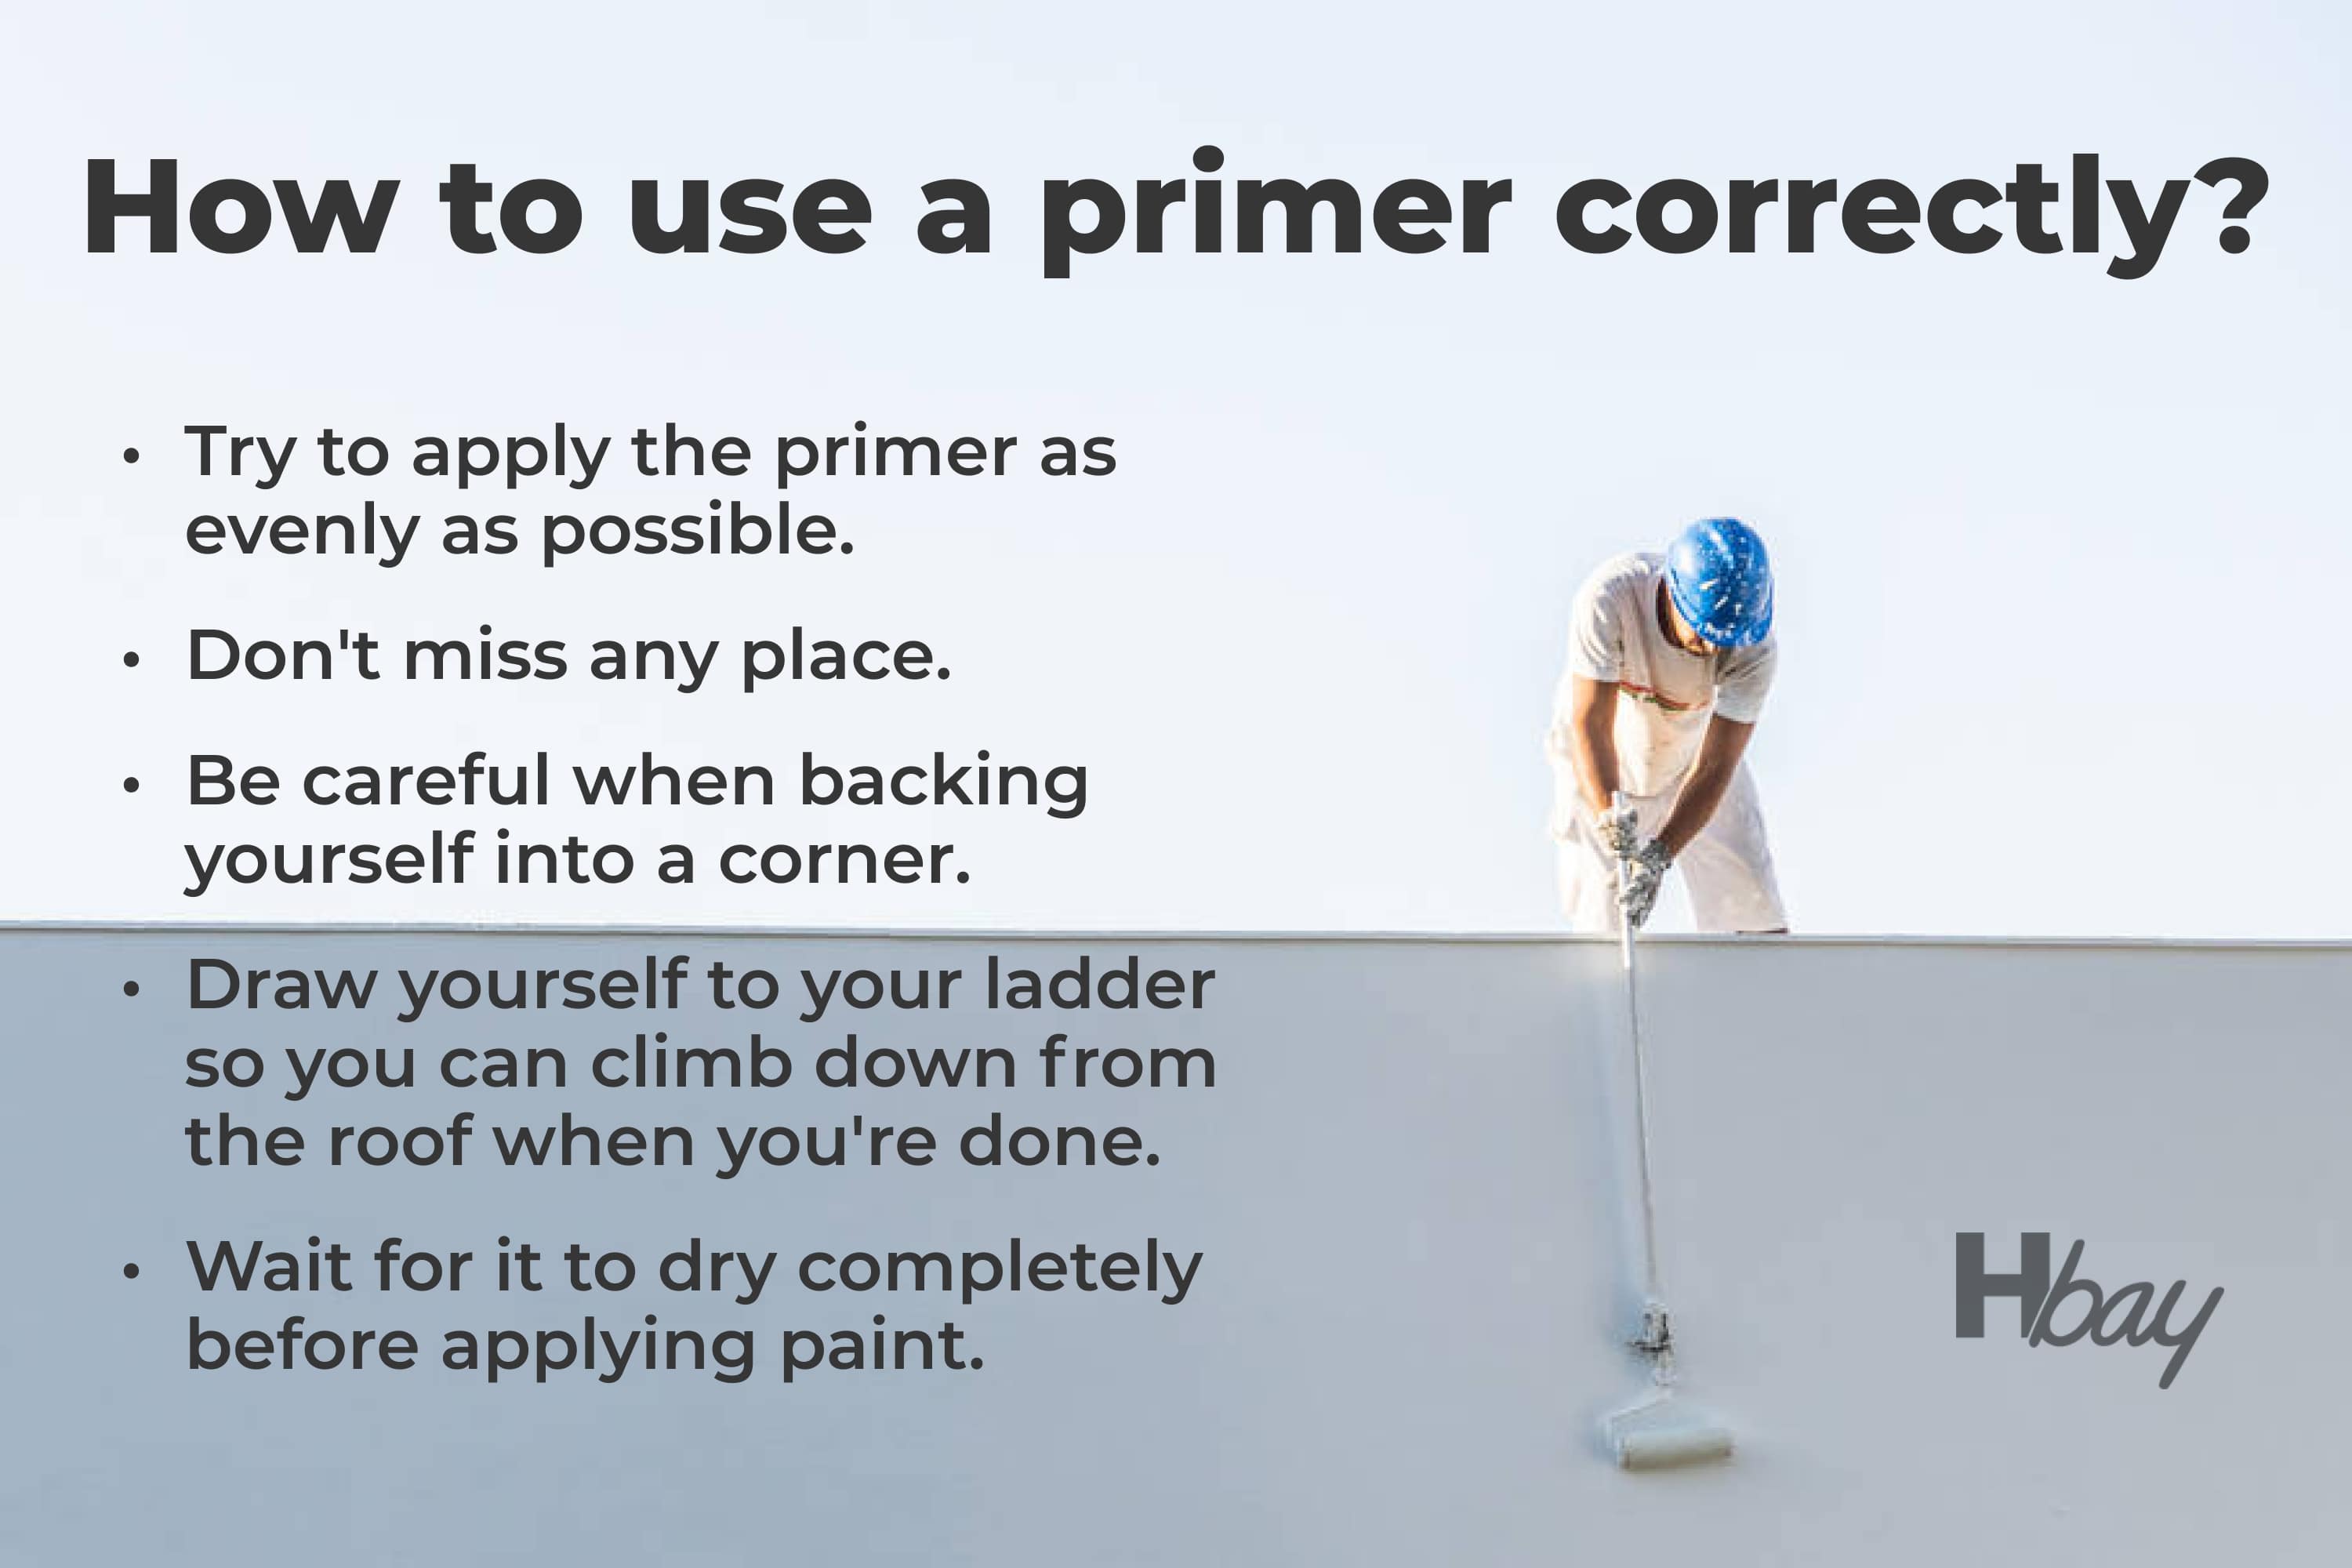 How to use a primer correctly